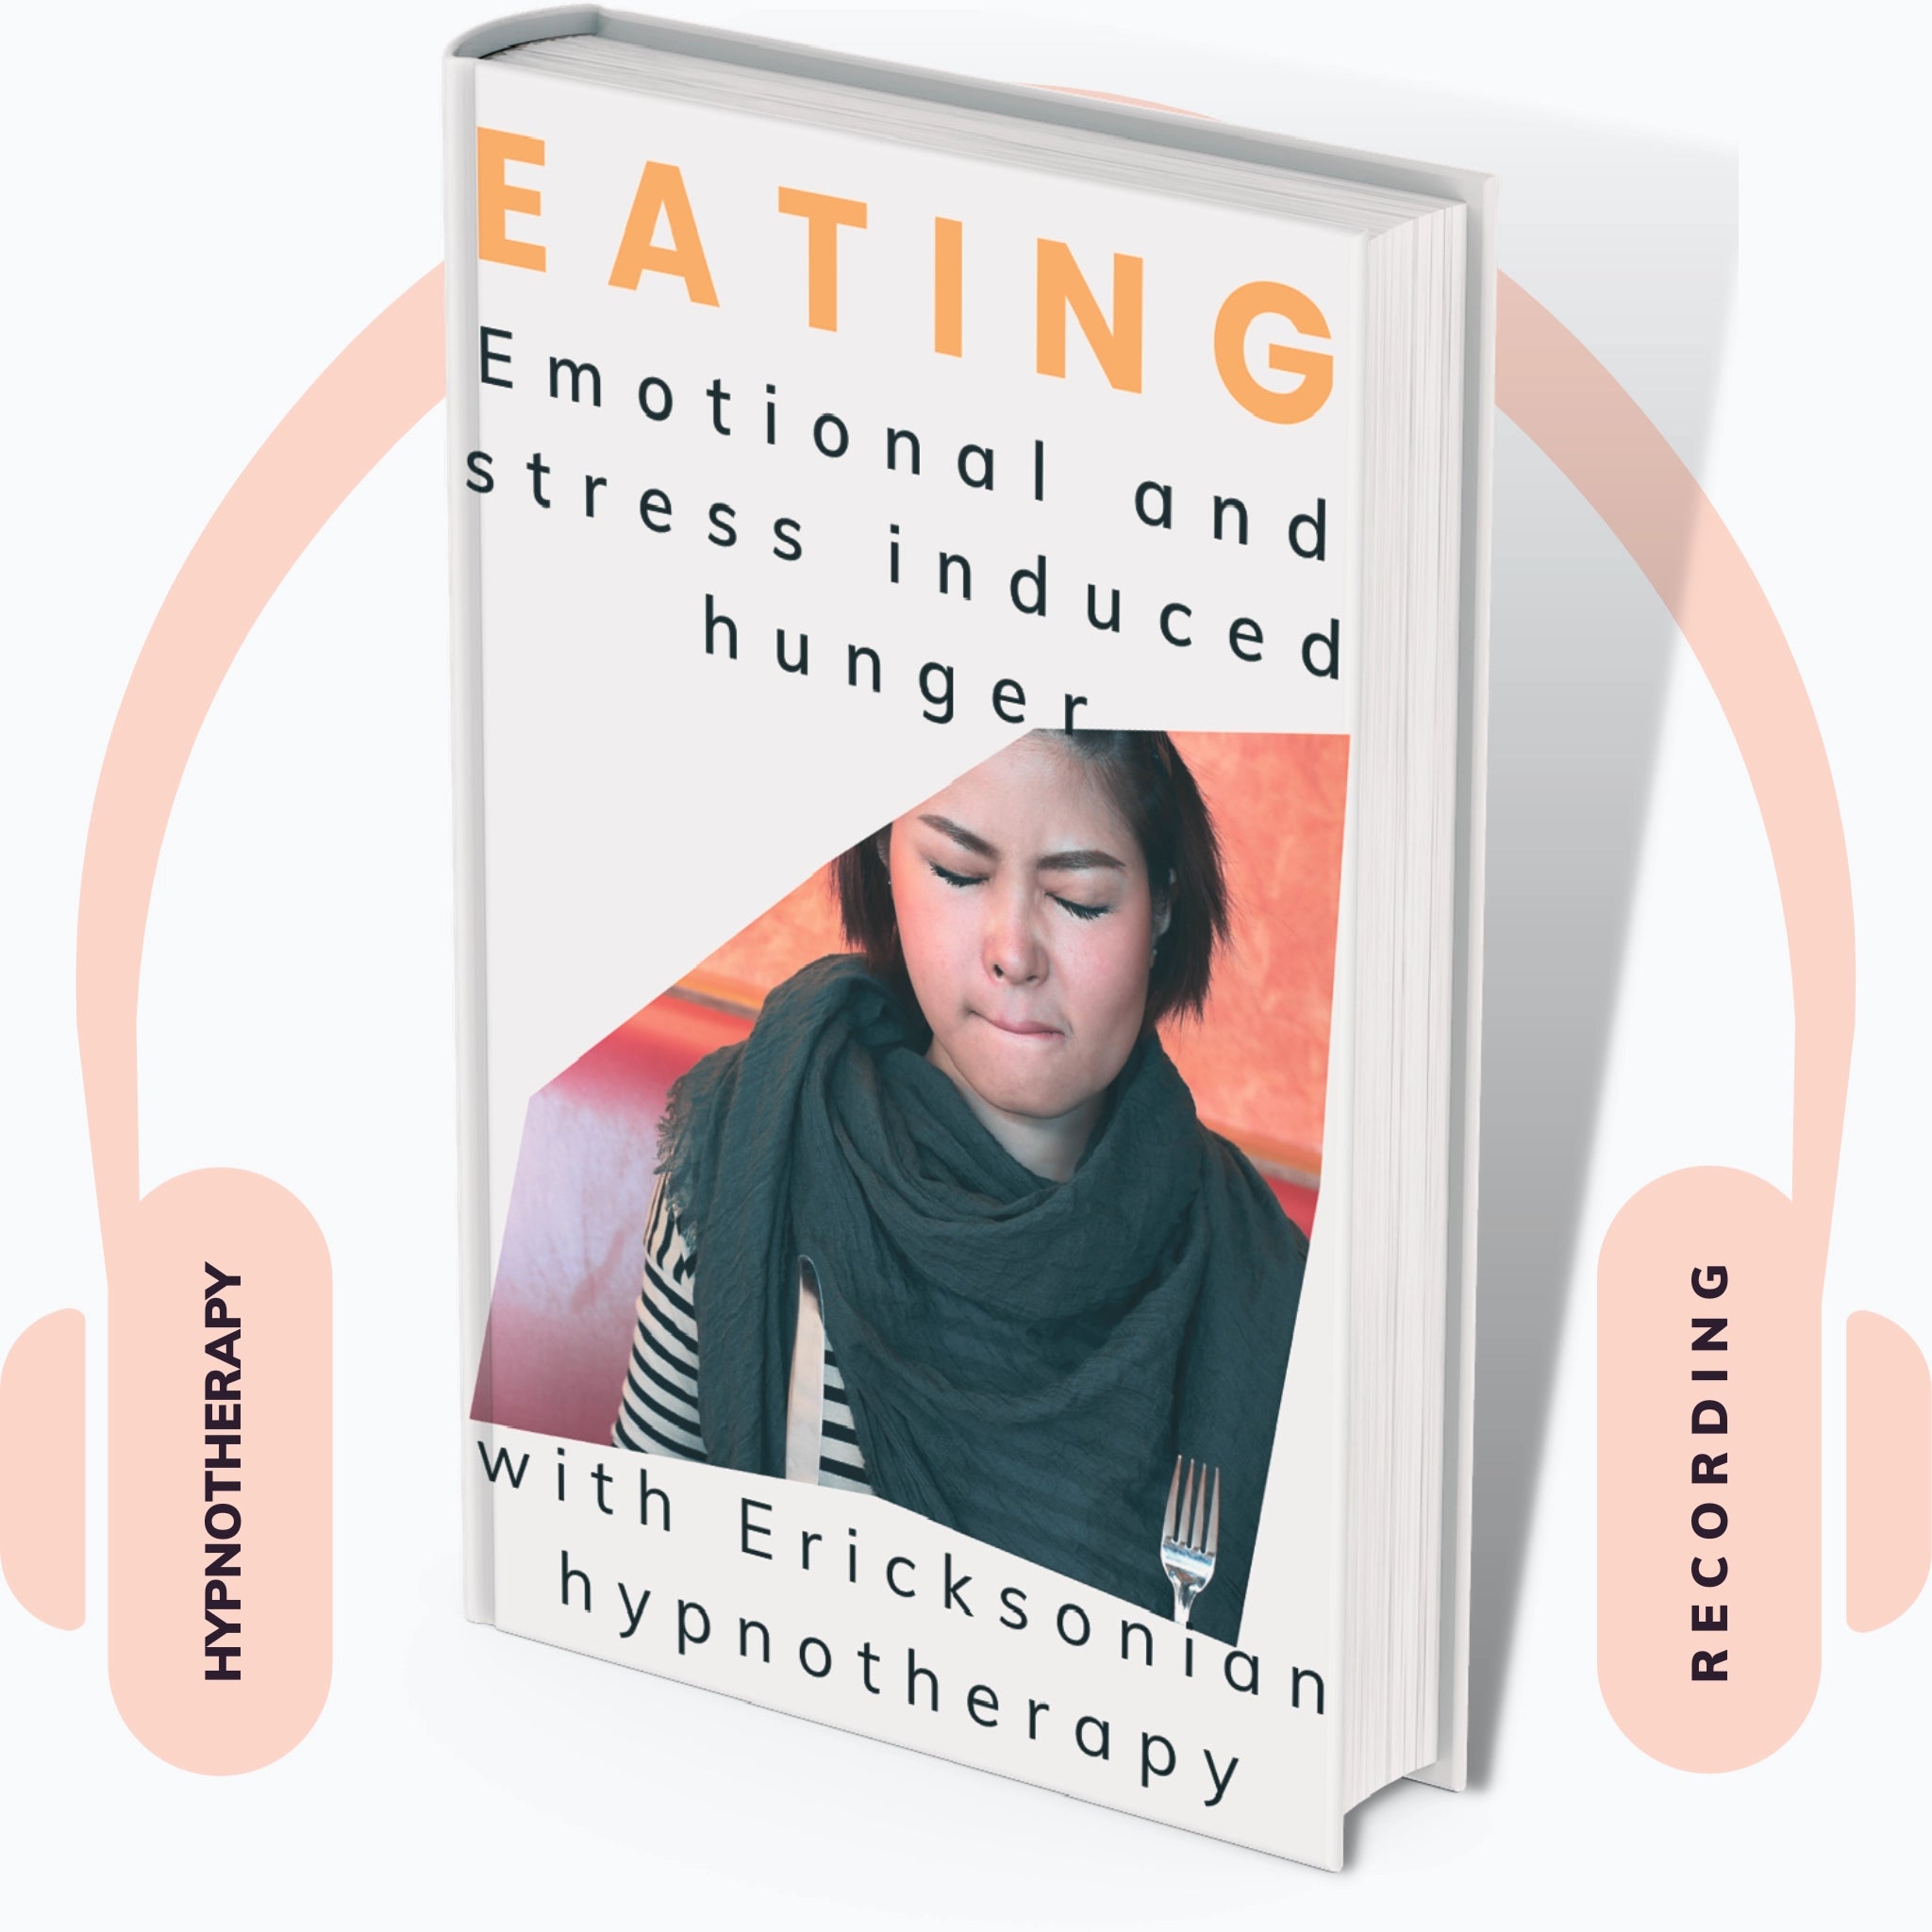 Audiobook cover: Eating, Emotional and stress induced hunger, with Ericksonian hypnotherapy